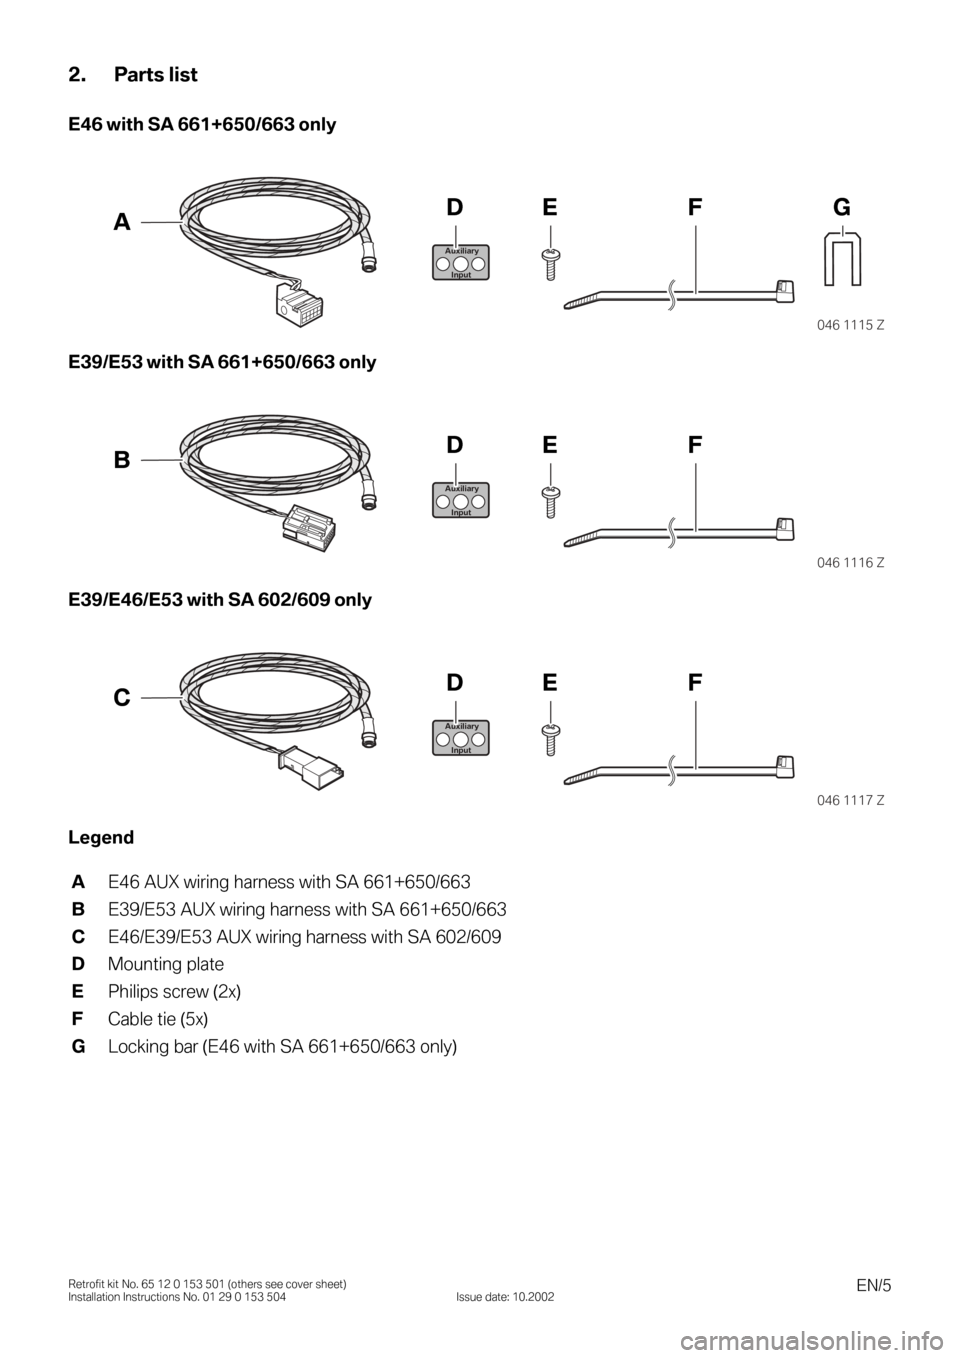 BMW 5 SERIES 2003 E39 Auxilliary Connector Installation Instruction Manual EN/5Retrofit kit No. 65 12 0 153 501 (others see cover sheet)
Installation Instructions No. 01 29 0 153 504 Issue date: 10.2002
2. Parts list
E46 with SA 661+650/663 only
0
E39/E53 with SA 661+650/663